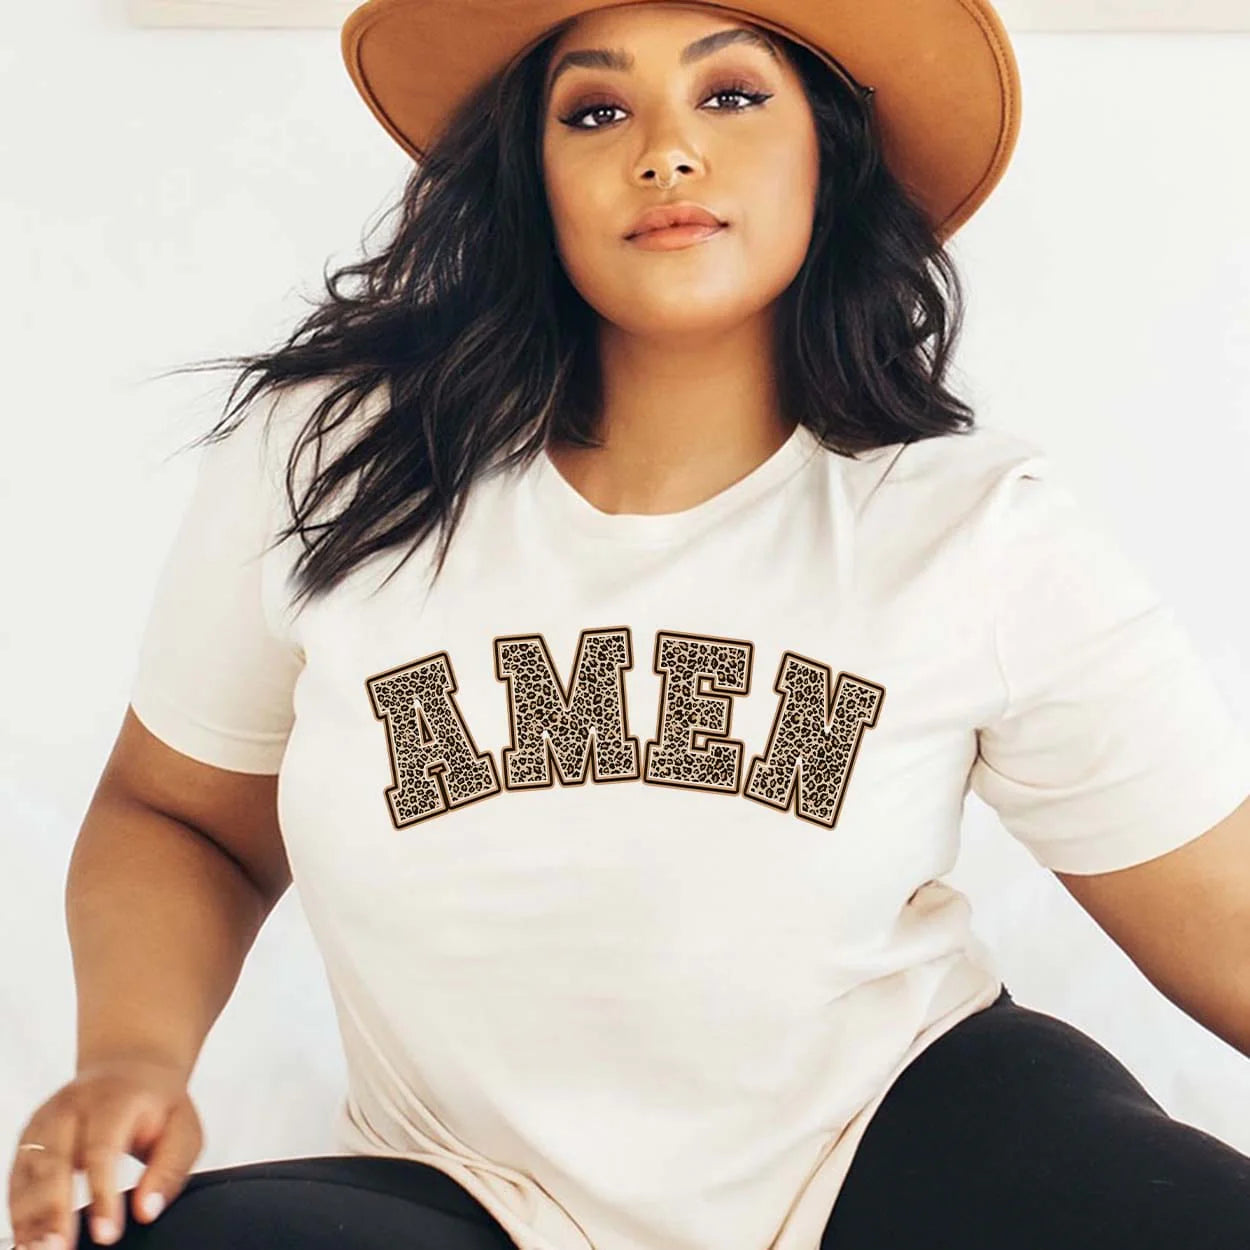 A cream colored short sleeve crew neck tee with the word "Amen" in a bold text and each letter is filled with a leopard print. Item is pictured on a plain white background